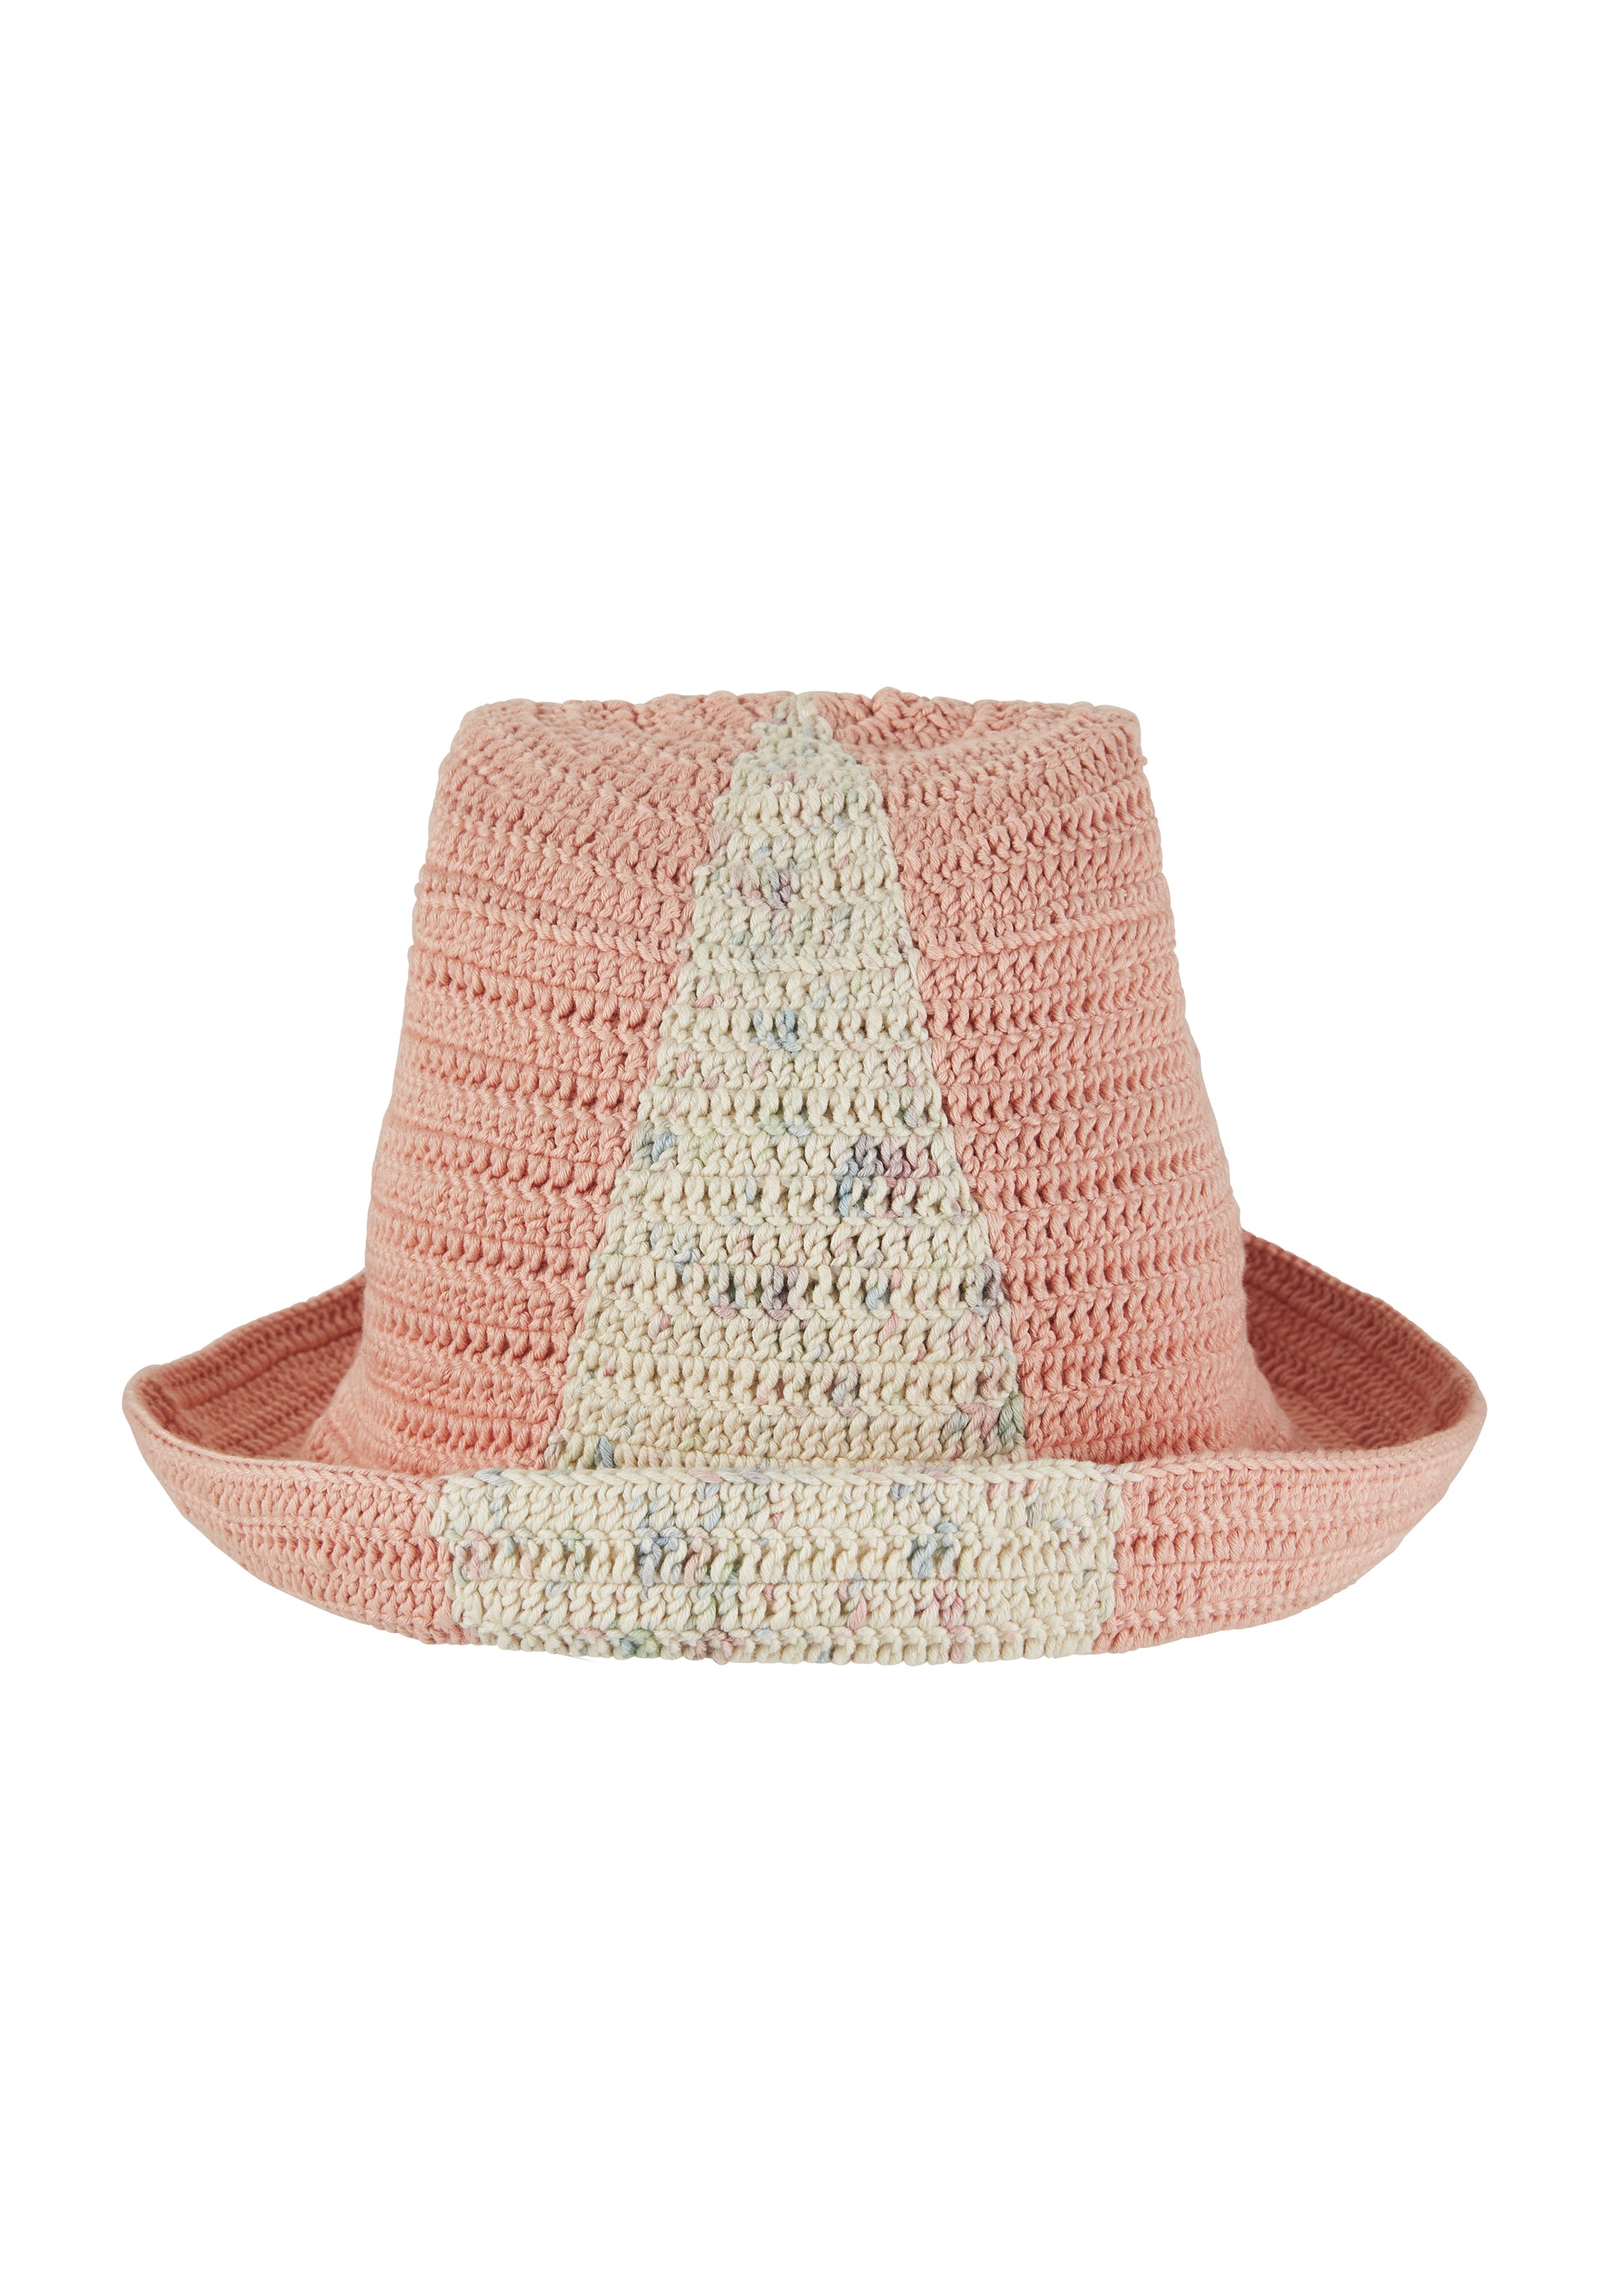 Cotton crochet bucket hat with dual stripe in Light Pink and Spacedye. Handmade sustainably from landfill diverted fibre. Soft hand feel. One size fits all.